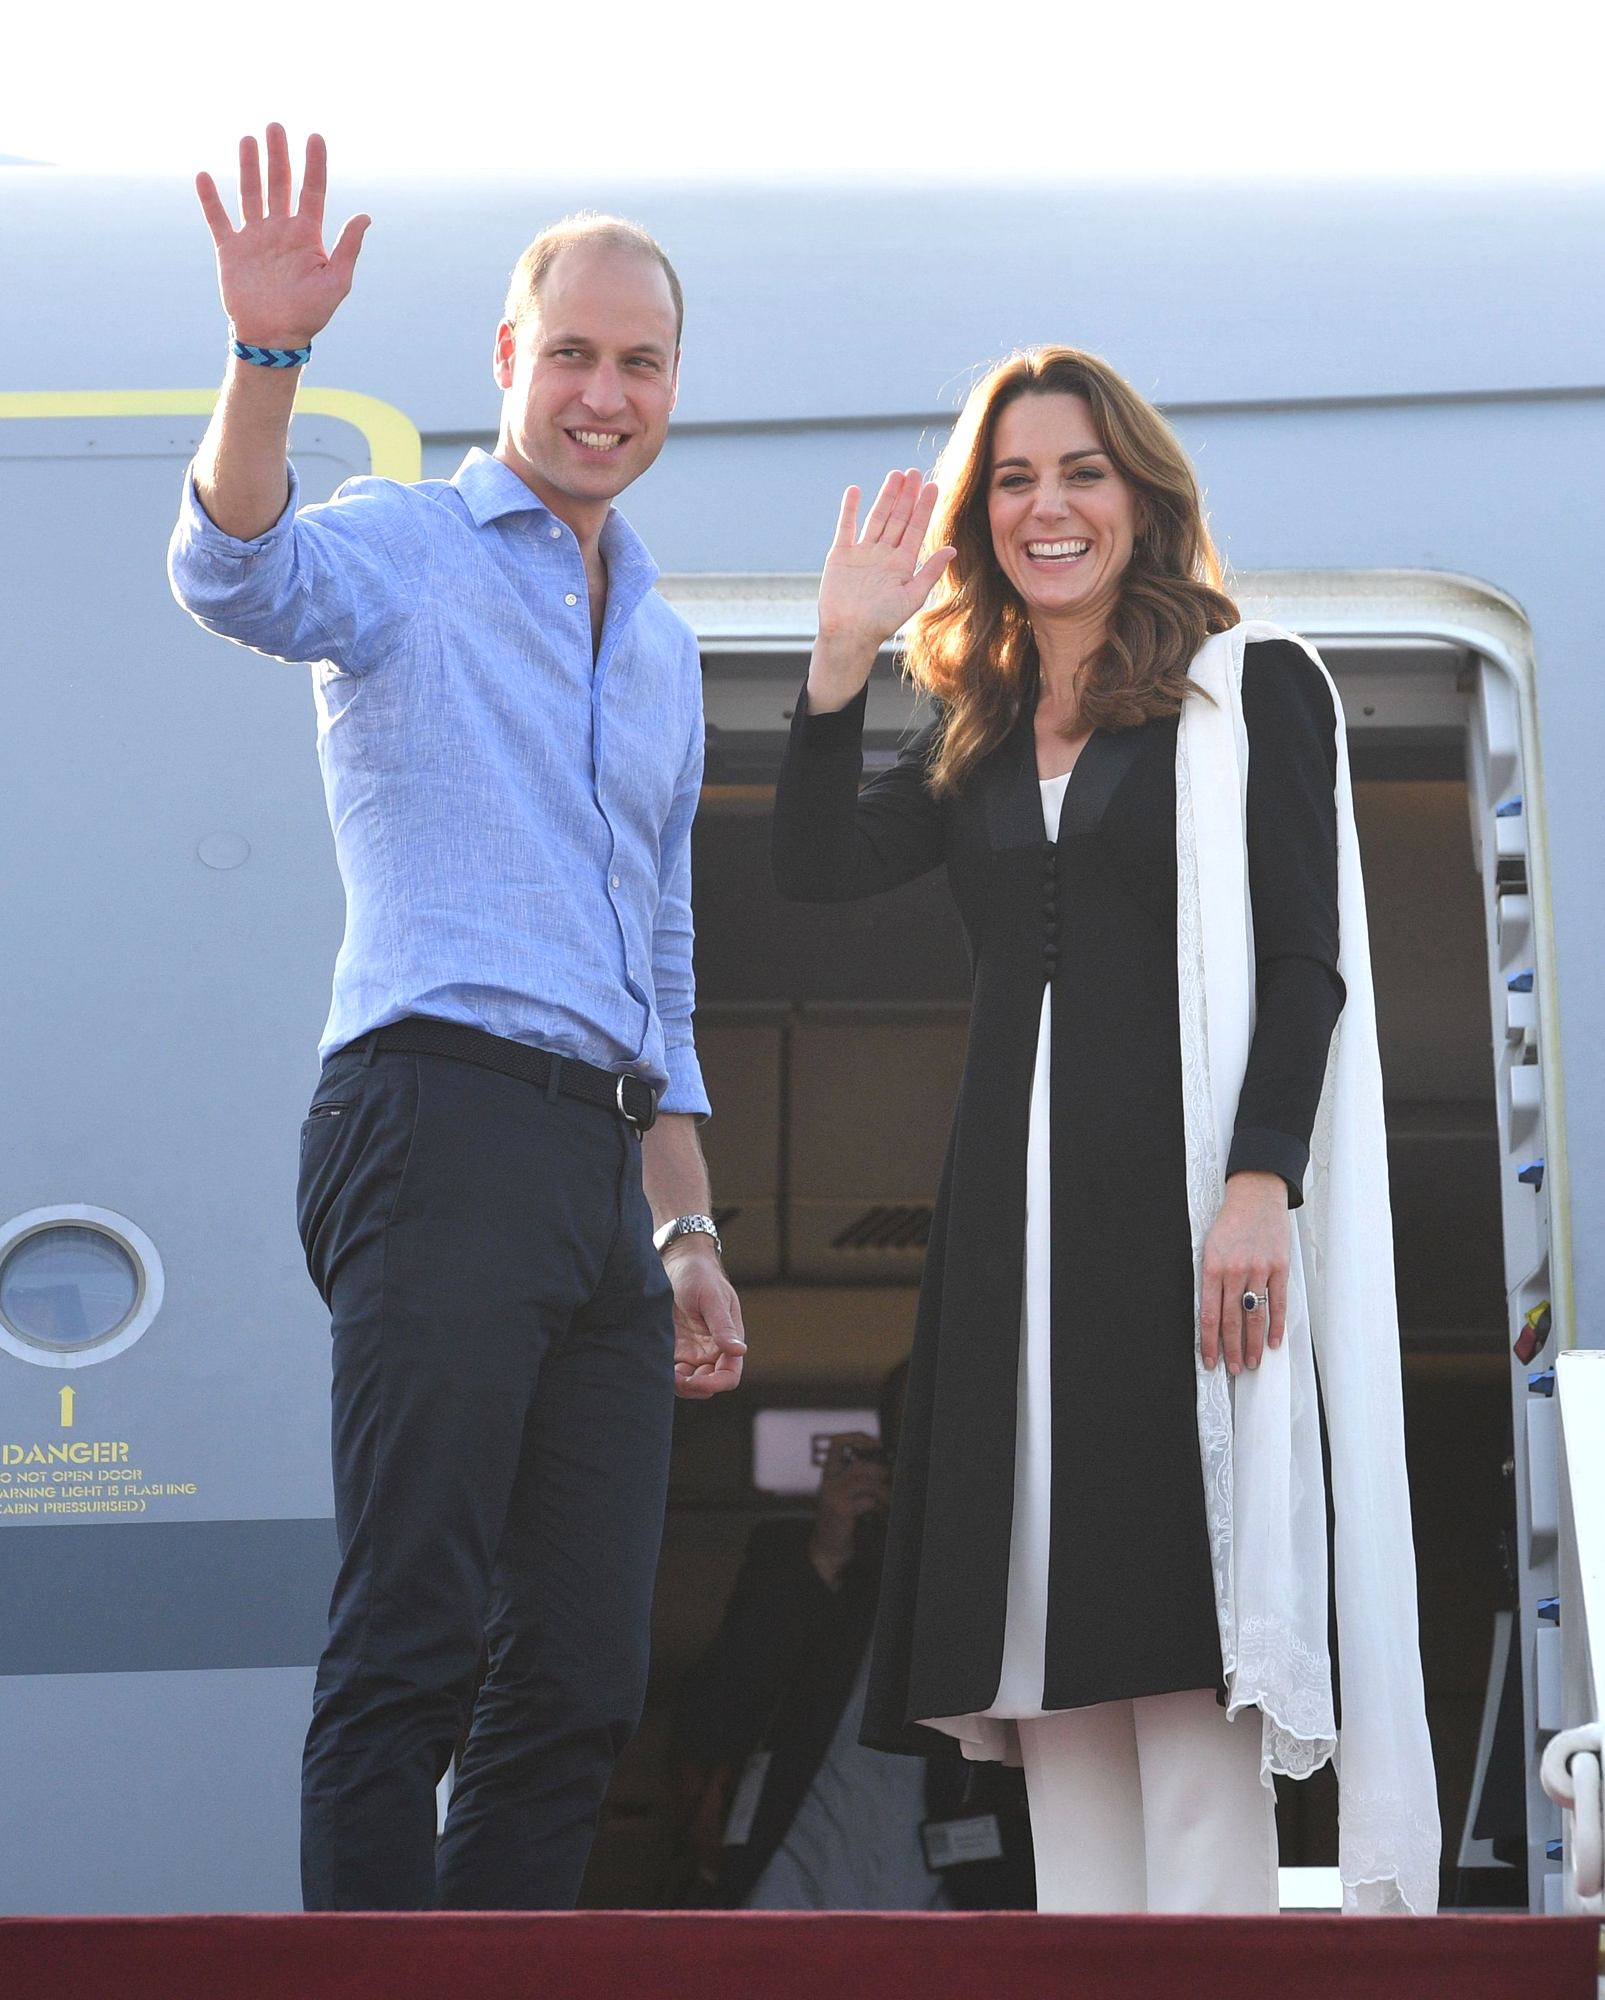 'Raised eyebrows!' Kate and William's lavish new home questioned as 'hardly norm'